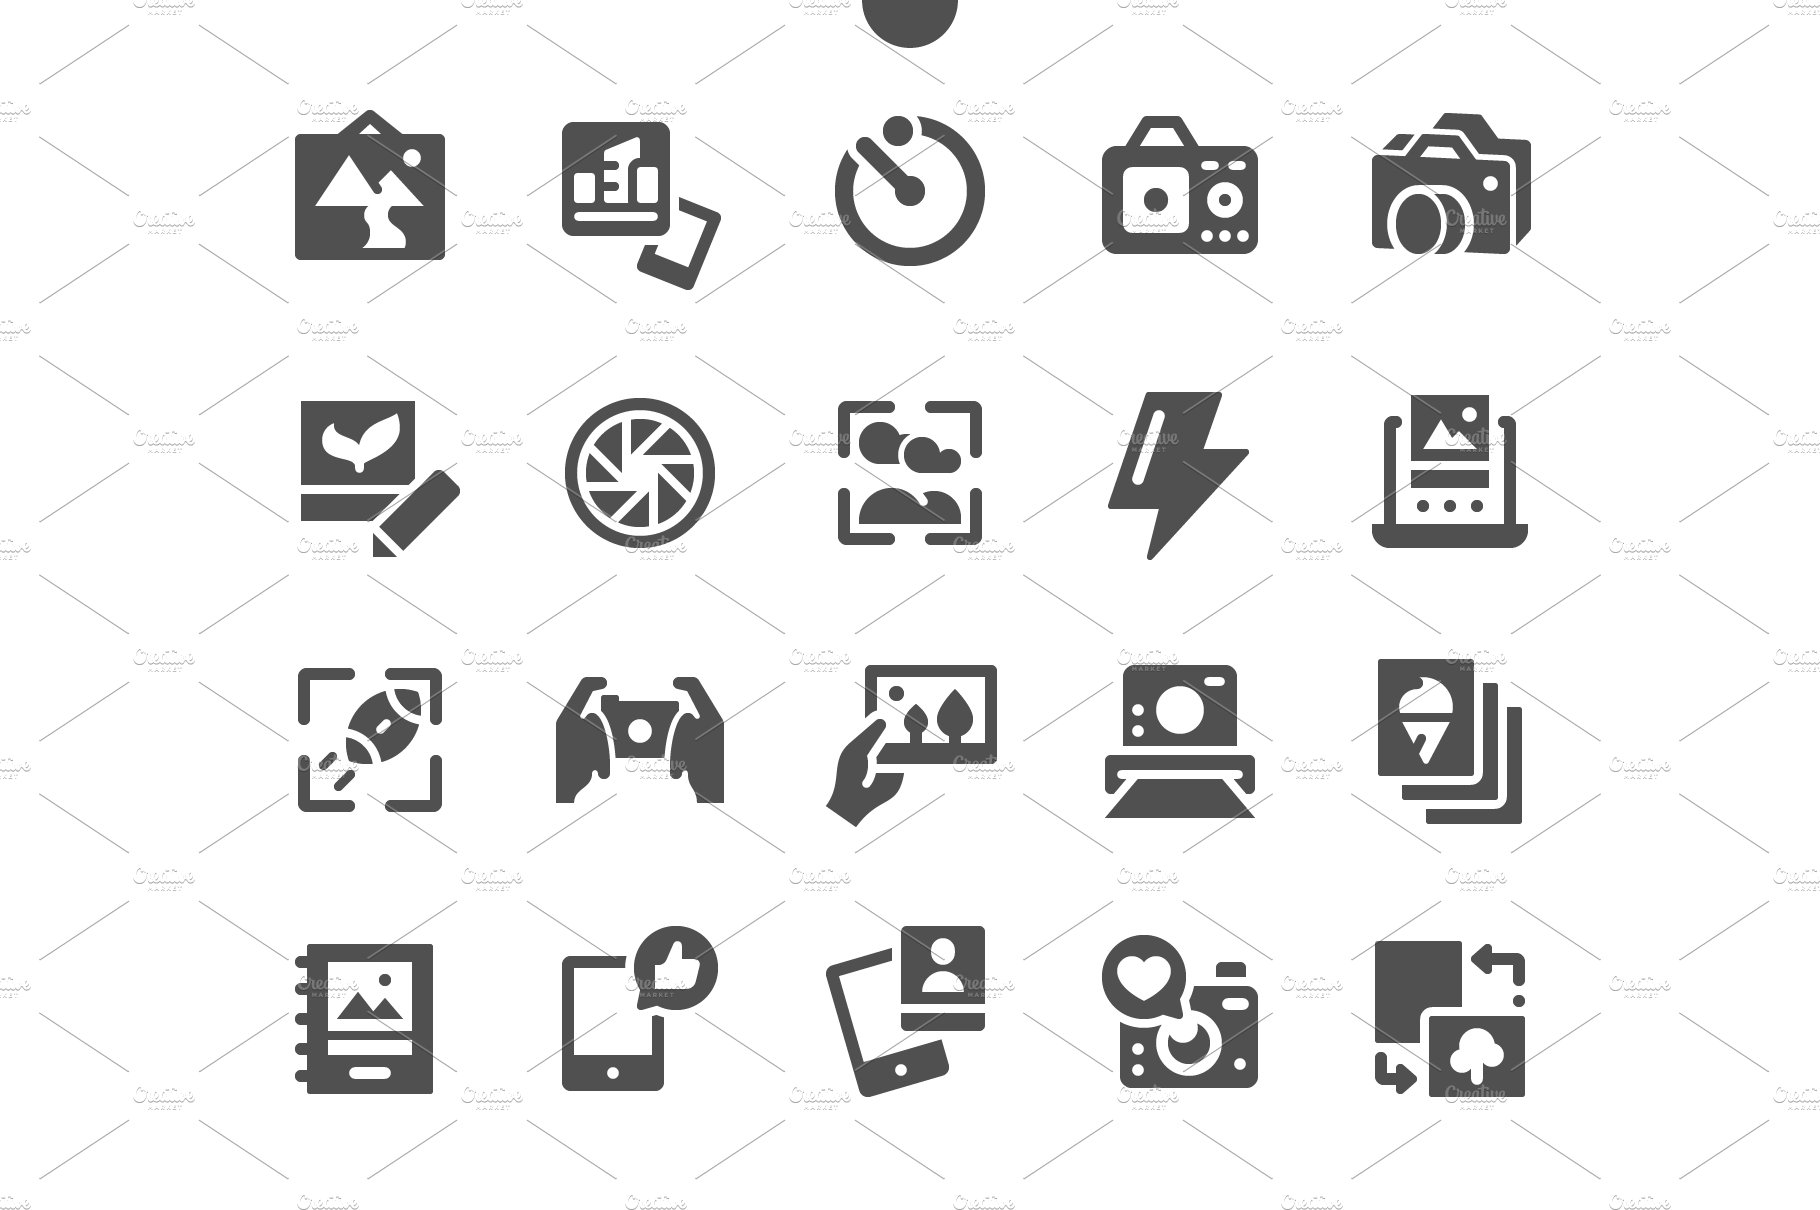 Photo Icons cover image.